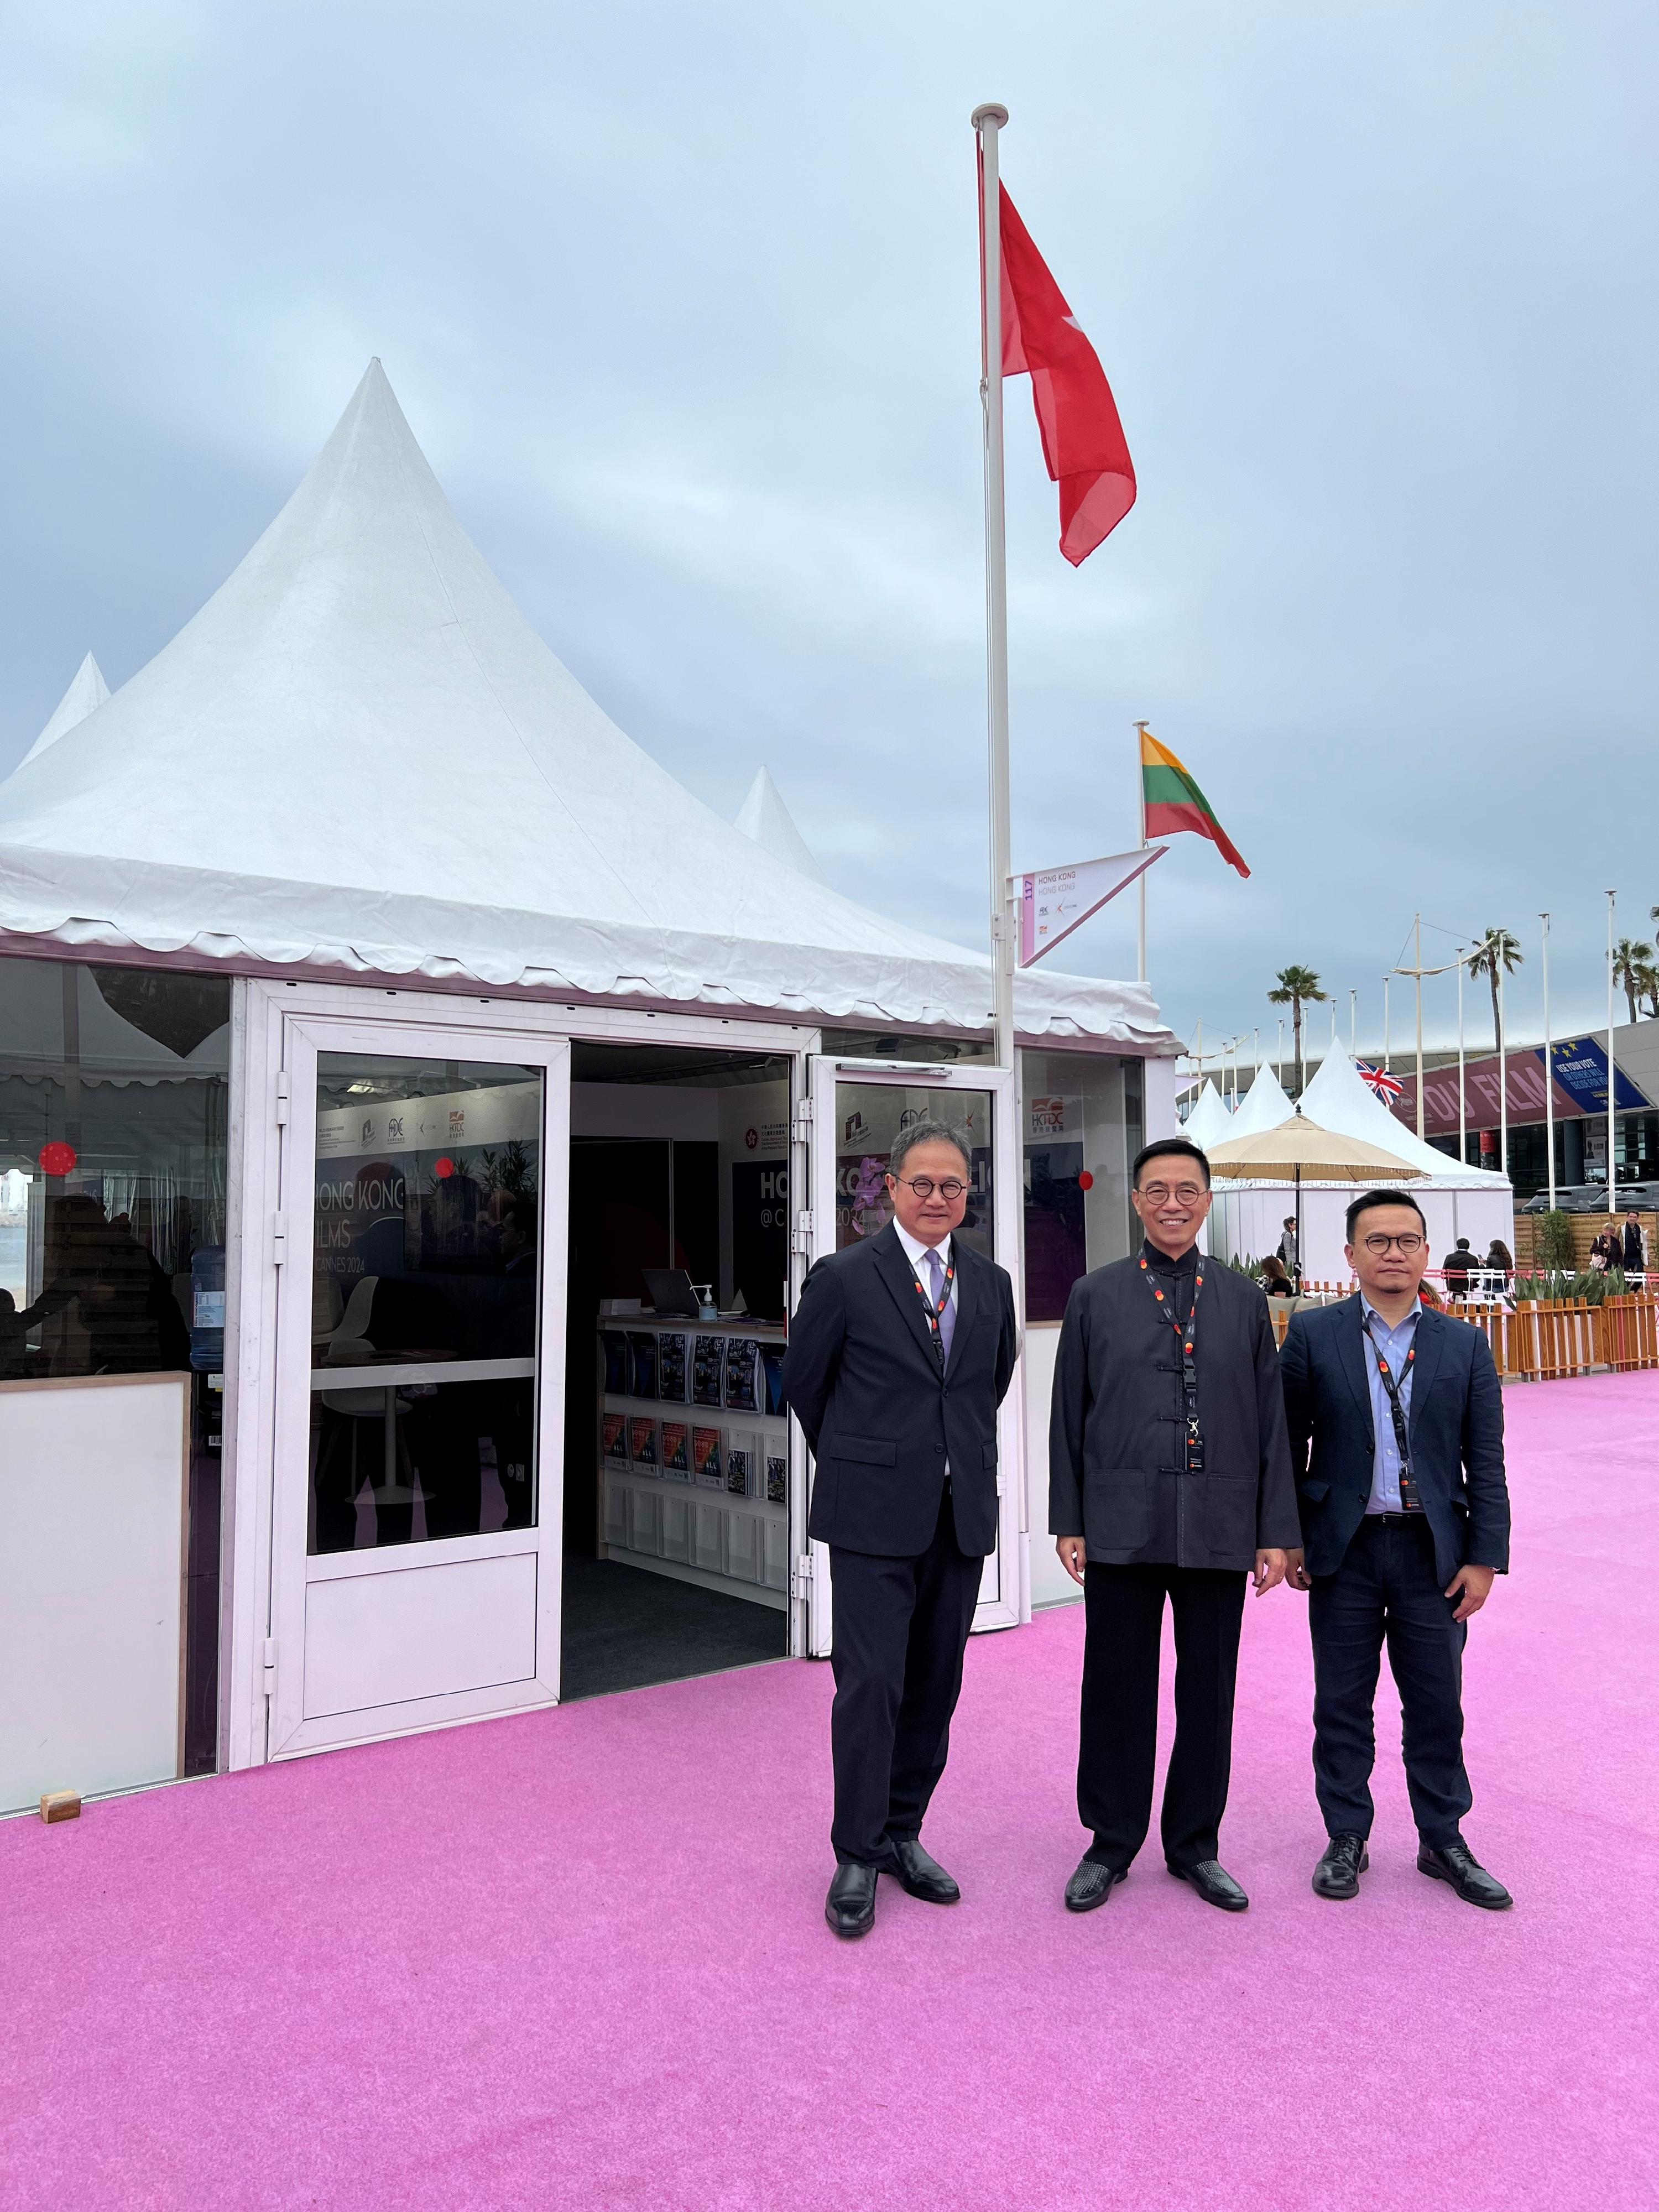 The Secretary for Culture, Sports and Tourism, Mr Kevin Yeung, led a Hong Kong film industry delegation to the 77th Cannes Film Festival in France. Accompanied by the Permanent Secretary for Culture, Sports and Tourism, Mr Joe Wong (left), and Assistant Head of Create Hong Kong Mr Gary Mak (right), Mr Yeung (centre) visited the Hong Kong Pavilion at the Cannes Film Market on May 15 (Cannes time).